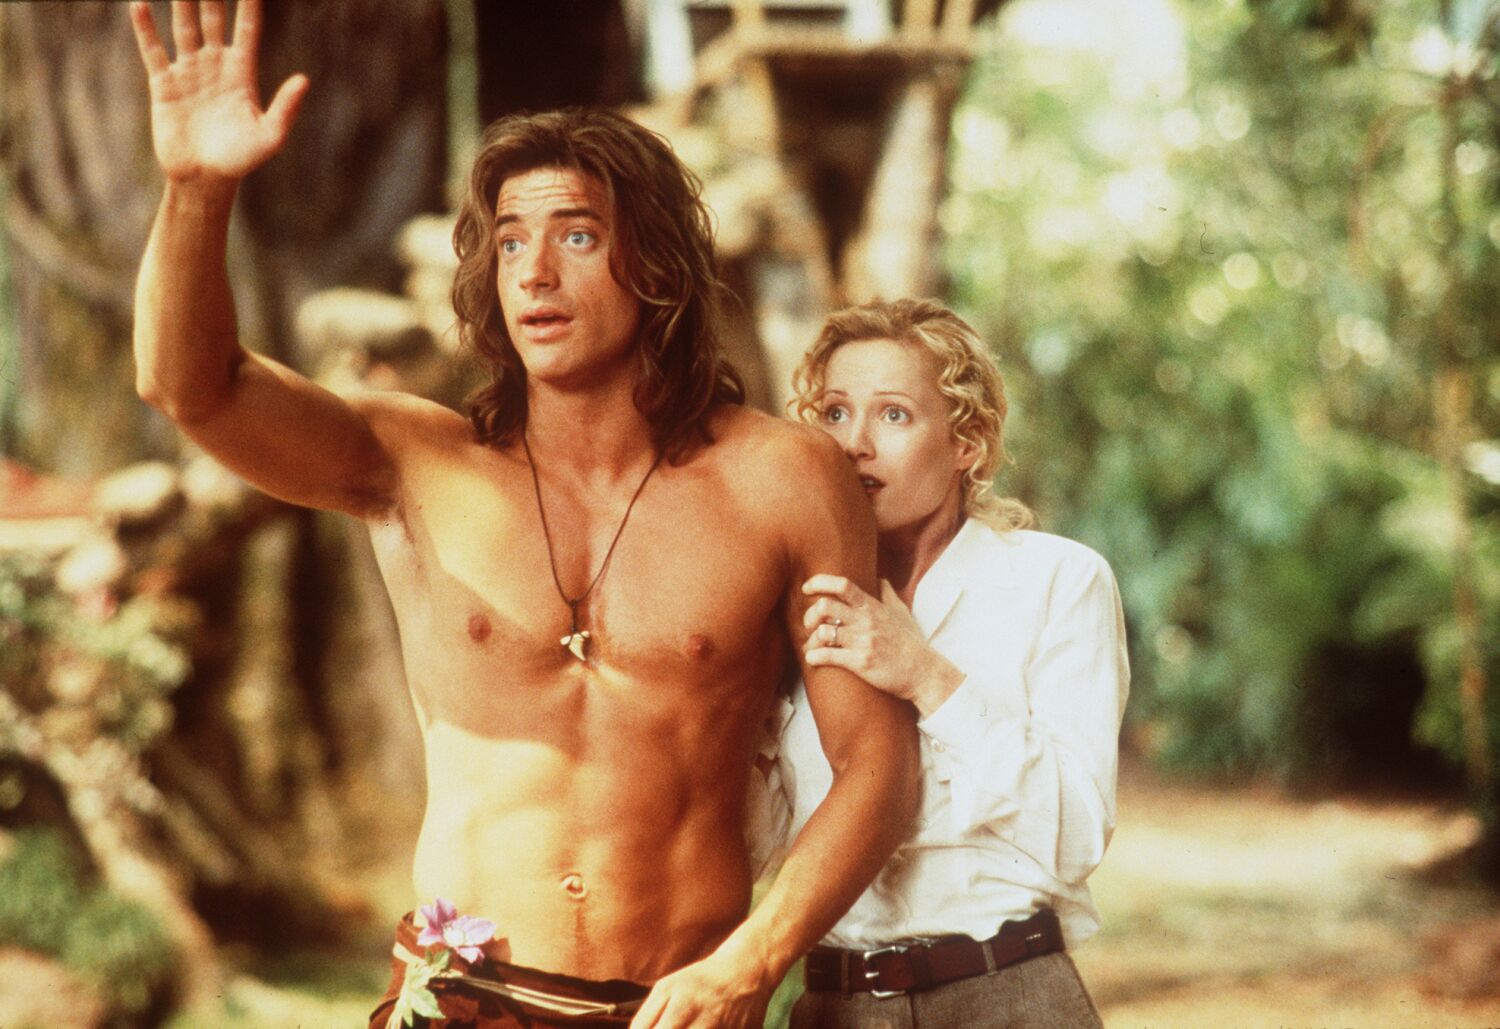 Brendan Fraser issues 'almost an apology' for 'George of the Jungle' Bay Bridge stunt